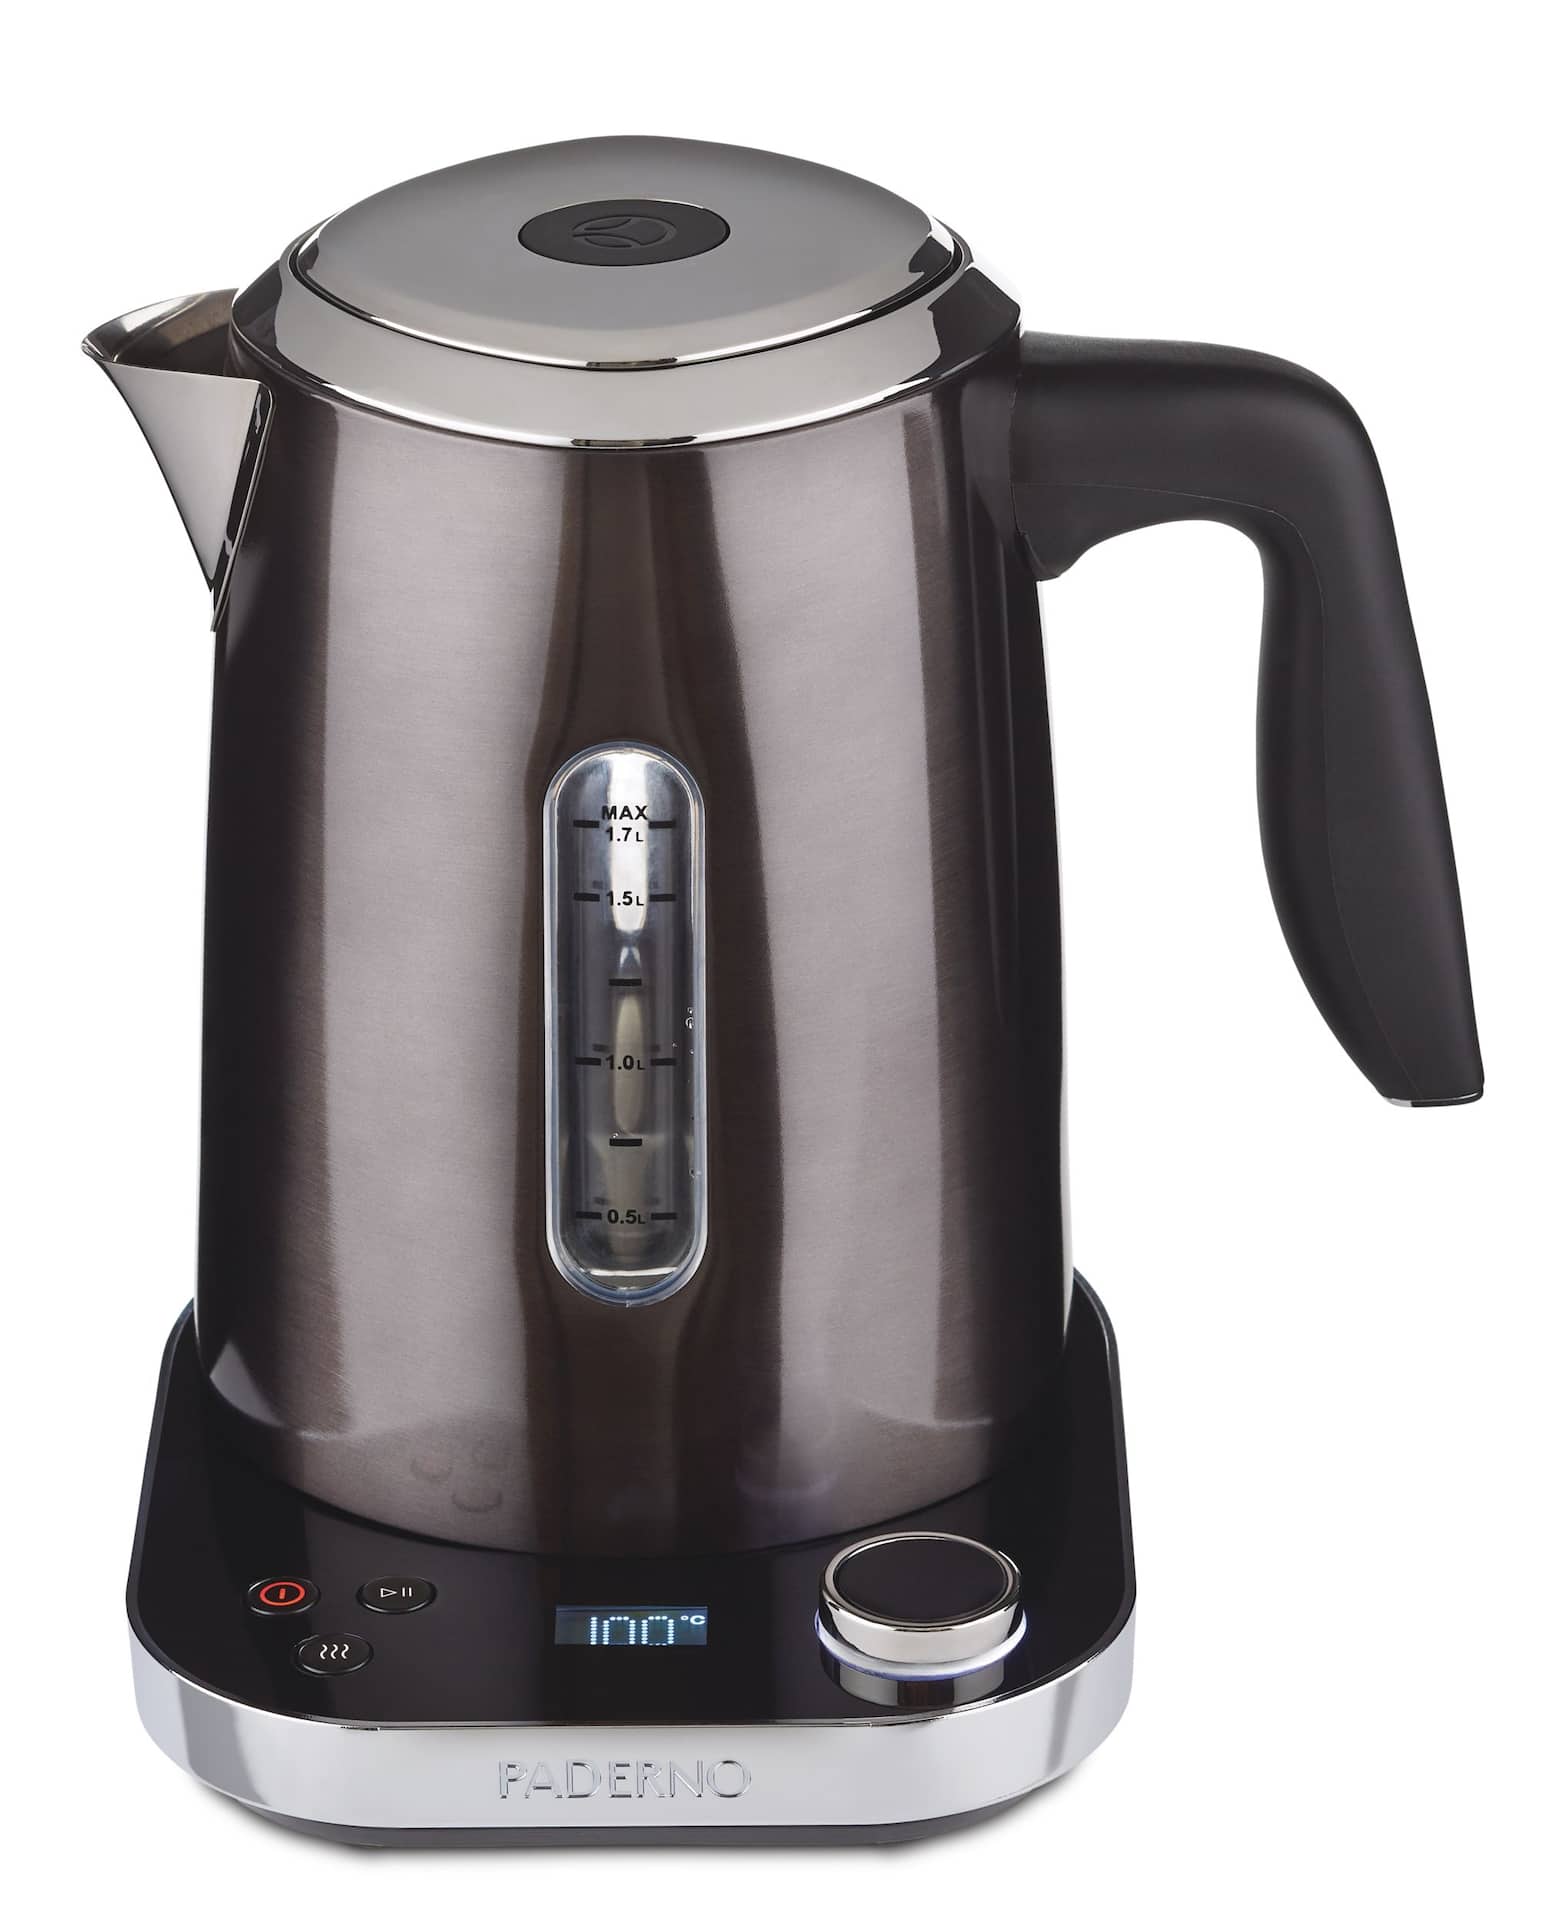 Cordless Electric Kettle Tea Coffee Touch Activated Programmable 1.7L Black